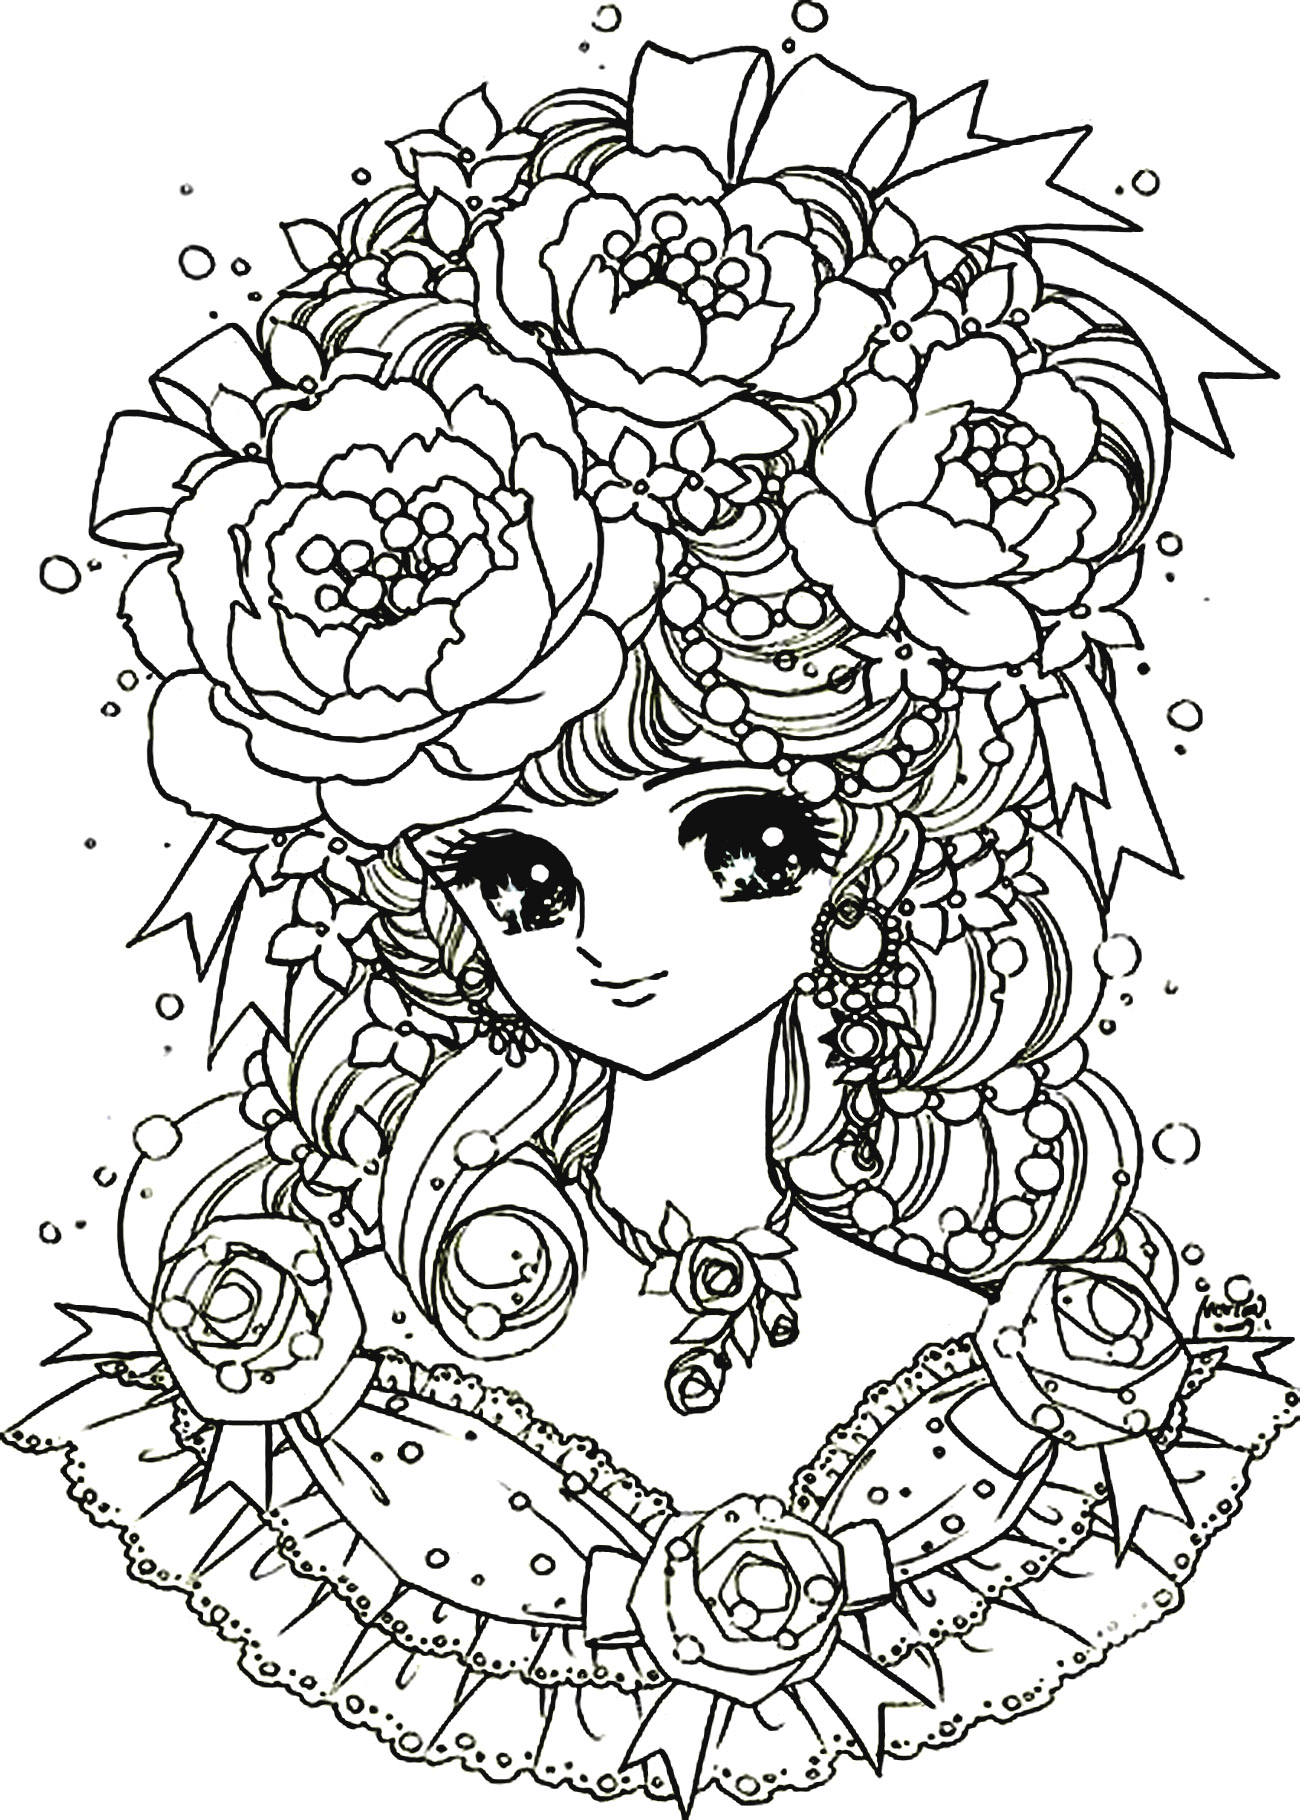 Manga coloring page of a girl with roses in her hair